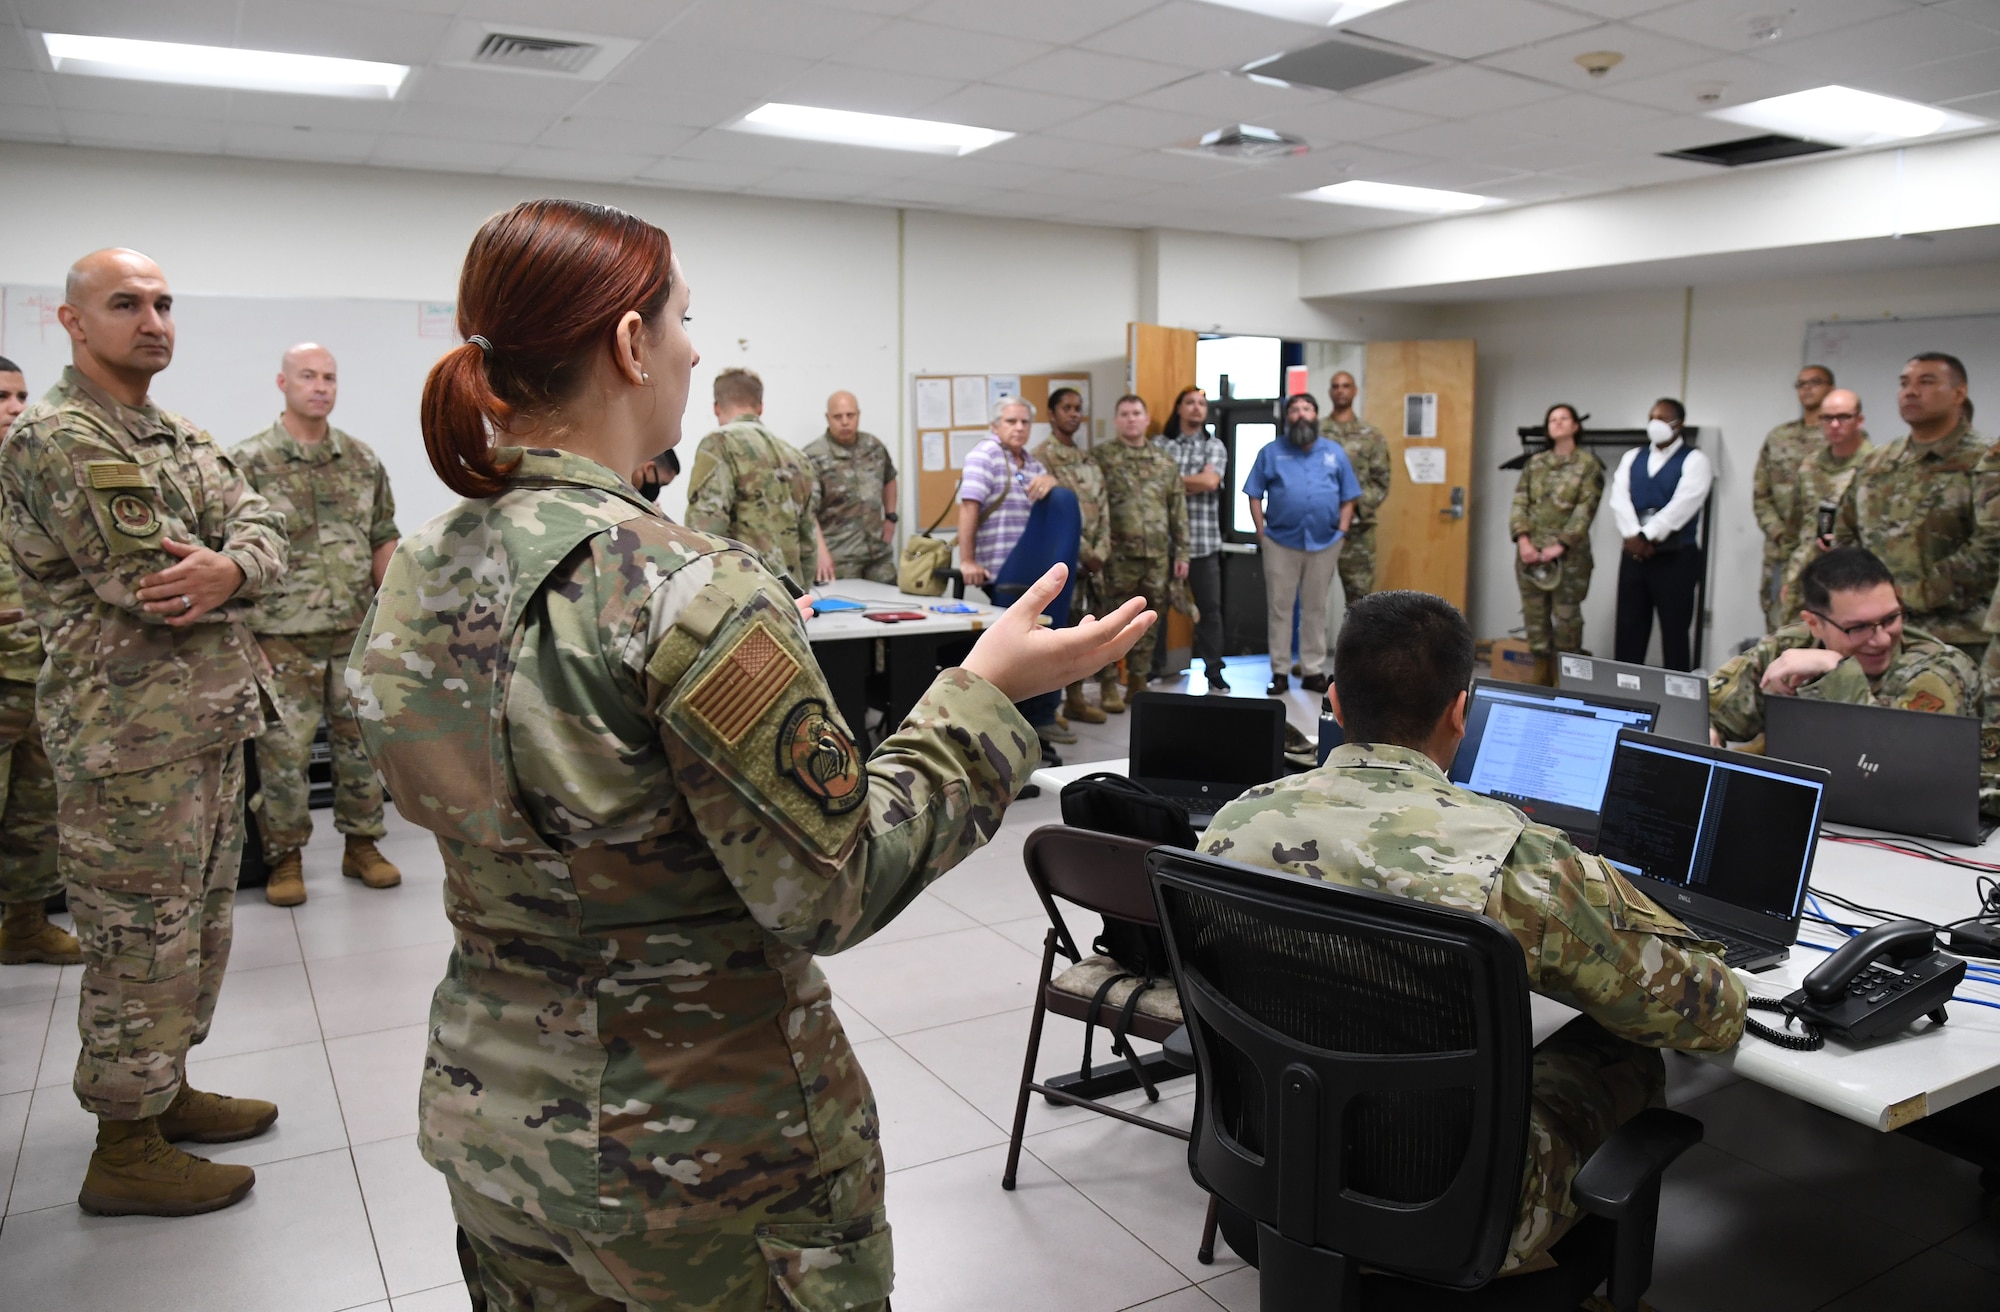 U.S. Air Force Tech. Sgt. Emily Sloan, 338th Training Squadron instructor, provides a cyber transport course briefing inside Bryan Hall at Keesler Air Force Base, Mississippi, July 21, 2021. The 81st Training Support Squadron hosted the Cyber Operations Specialty Training and Requirements Team Conference for cyber operations career field managers and MAJCOM functional managers July 19-23. (U.S. Air Force photo by Kemberly Groue)